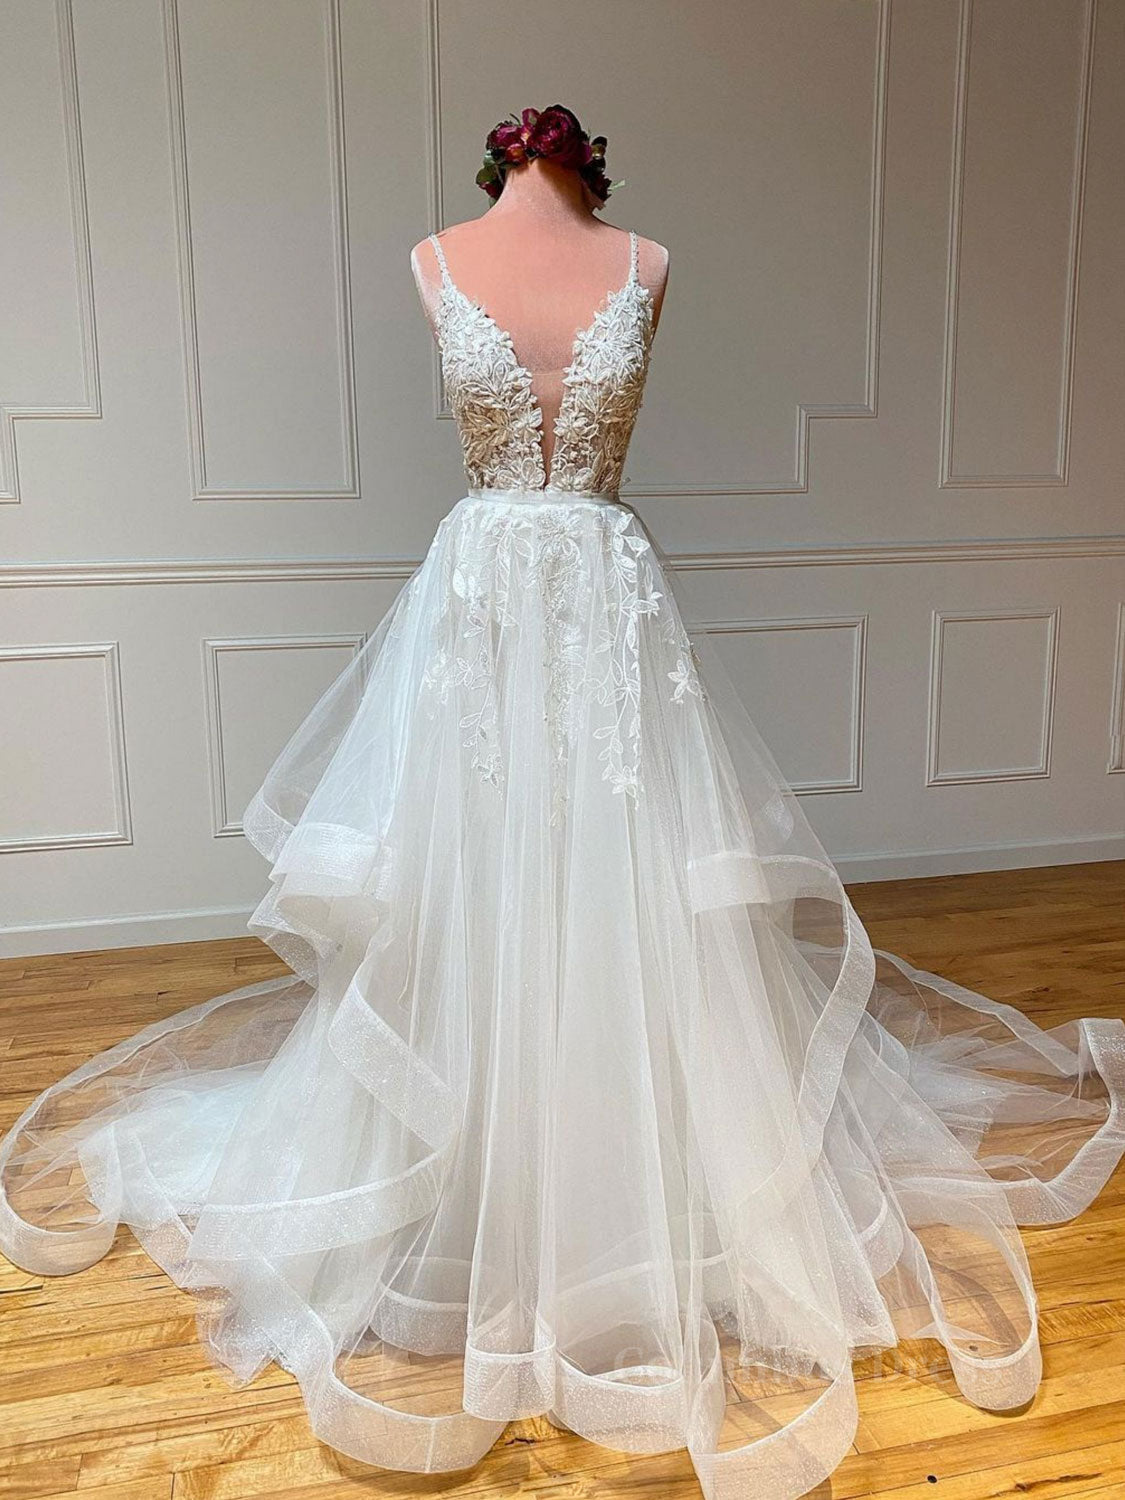 Prom Dress Colorful, White v neck tulle lace long prom dress, white lace formal dress